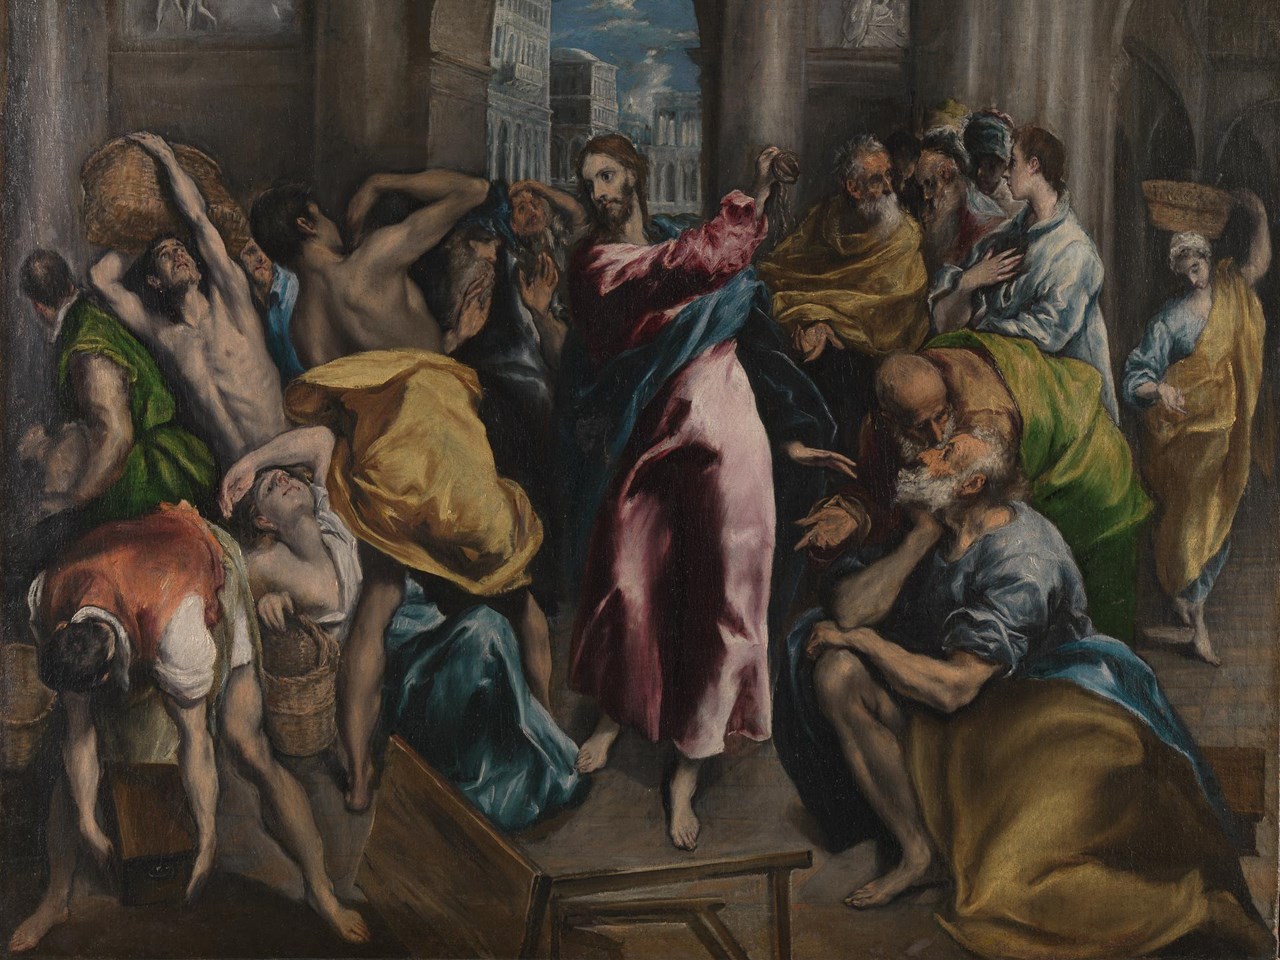 Christ Driving the Traders from the Temple (probably before 1570) by El Greco (1541-1614)